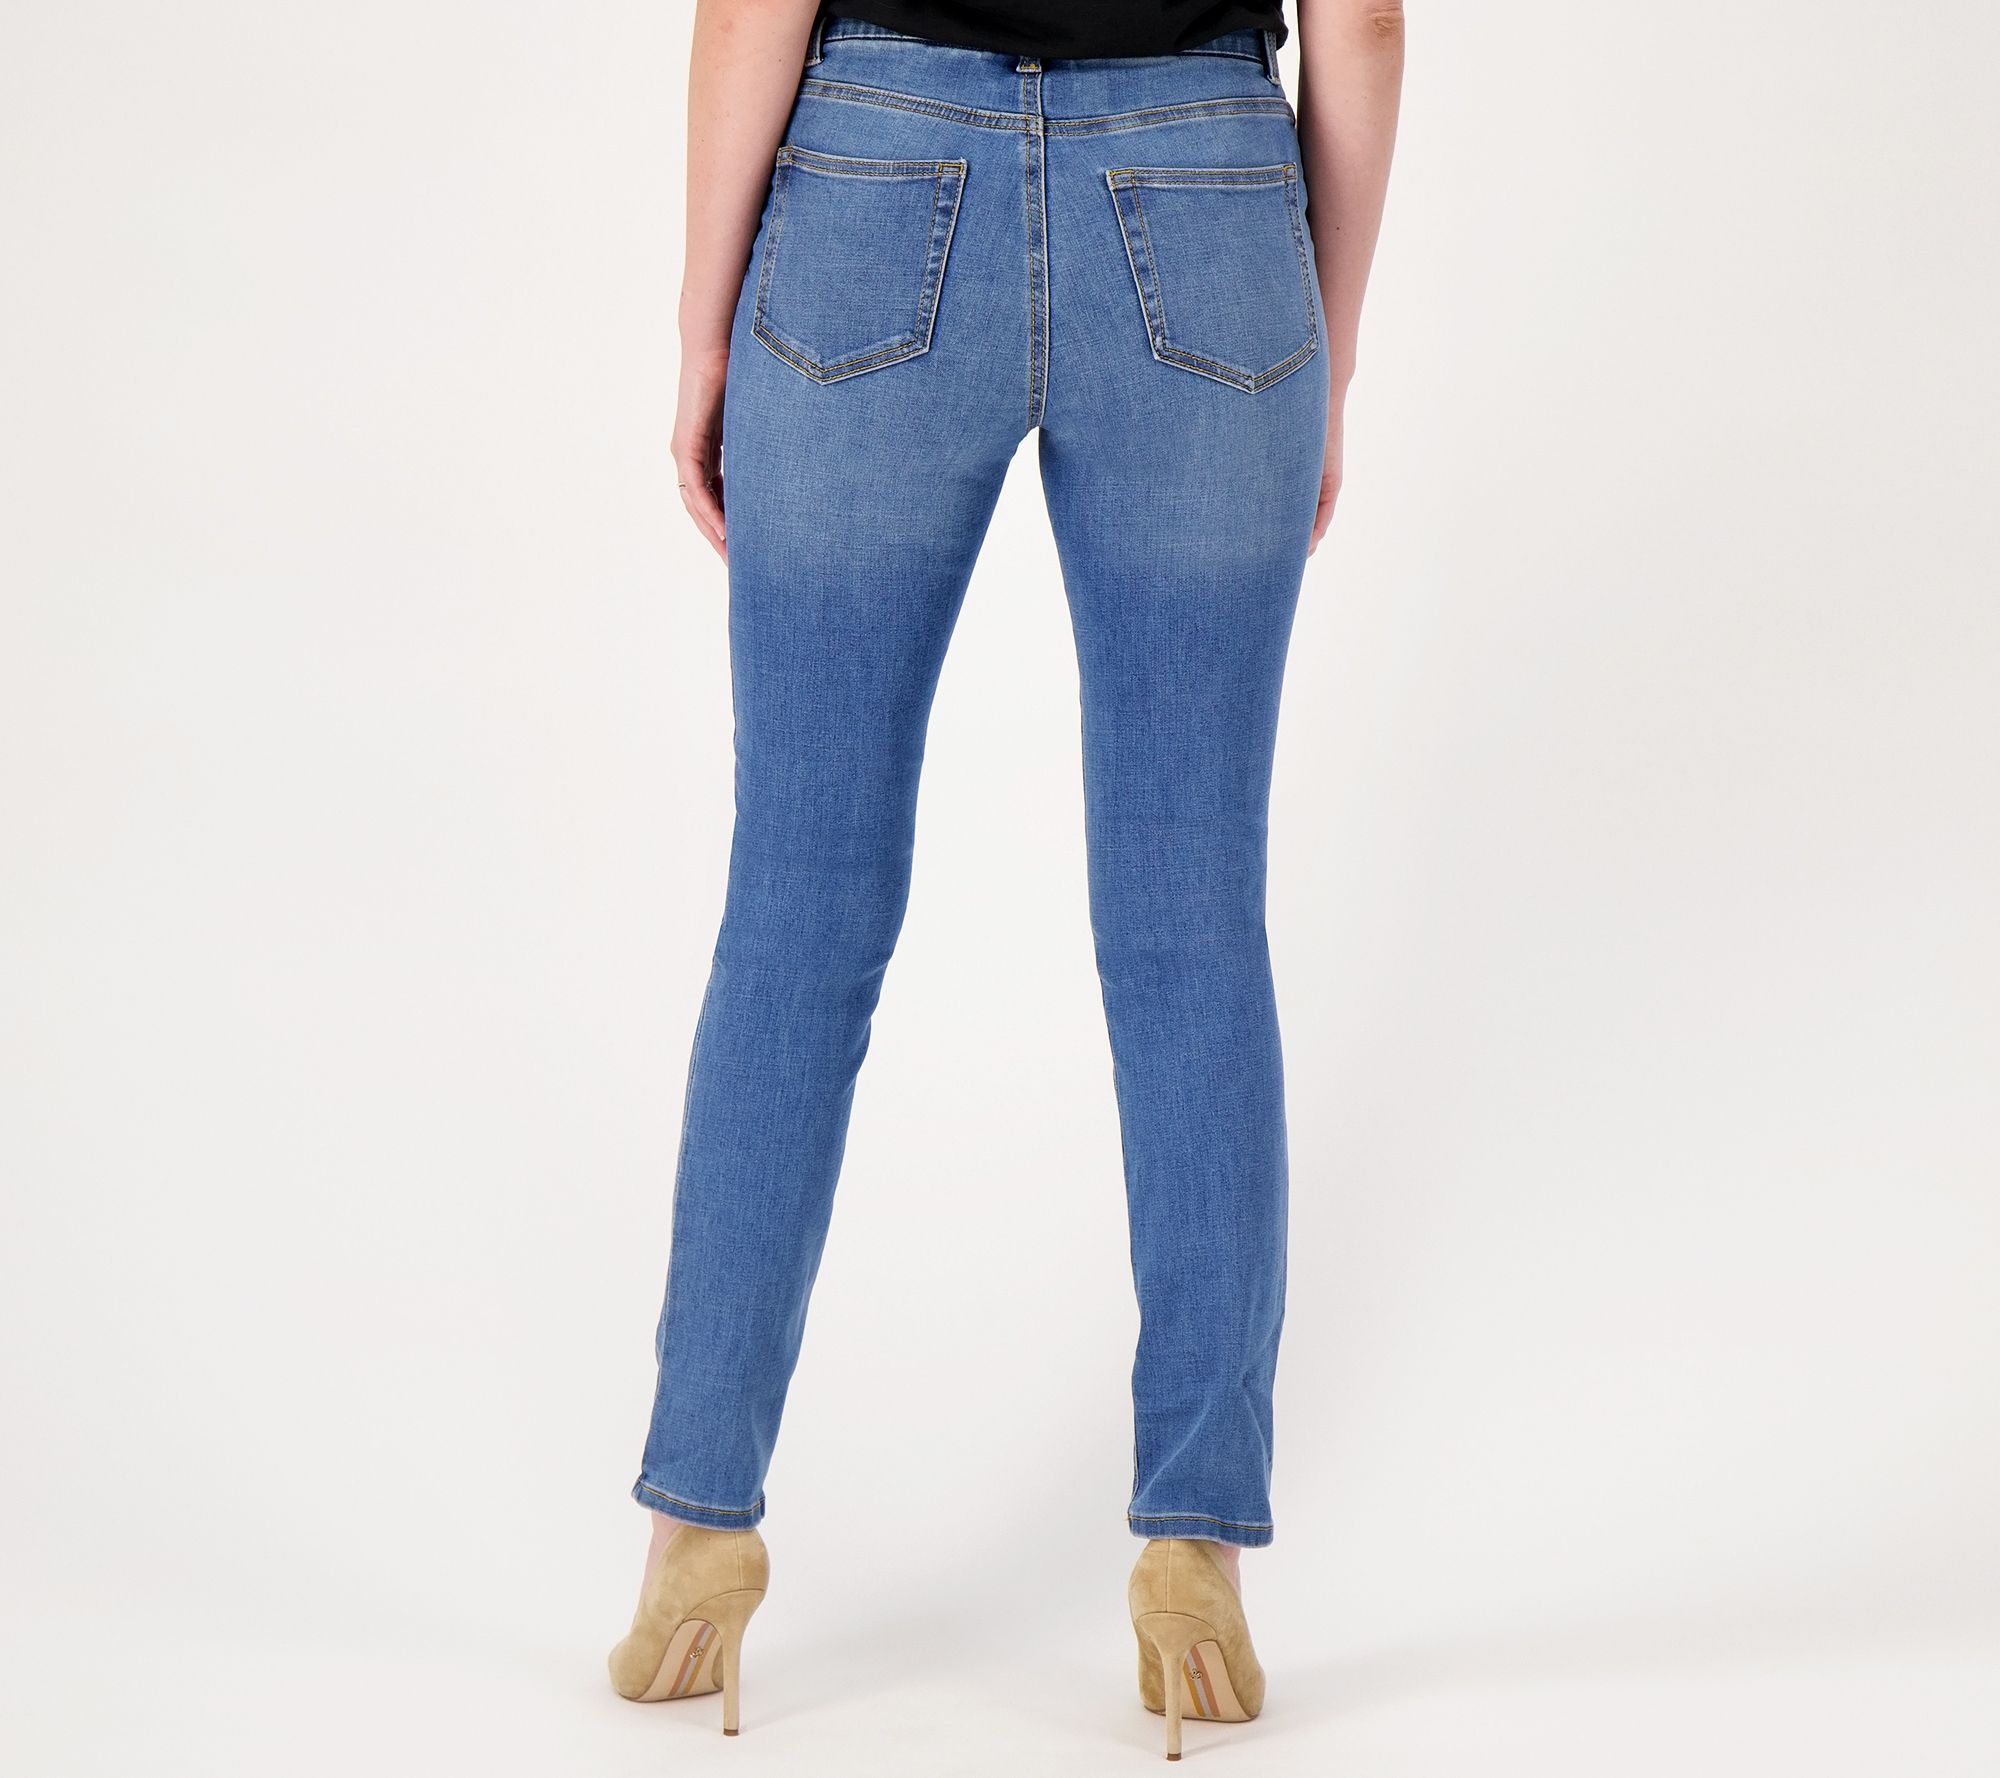 Totally Workwear Preston - Urban CoolMax Denim Jeans are made to be  comfortable in all seasons. It's slim fit stretch denim and crotch gusset  will keep you moving easy all day 👌